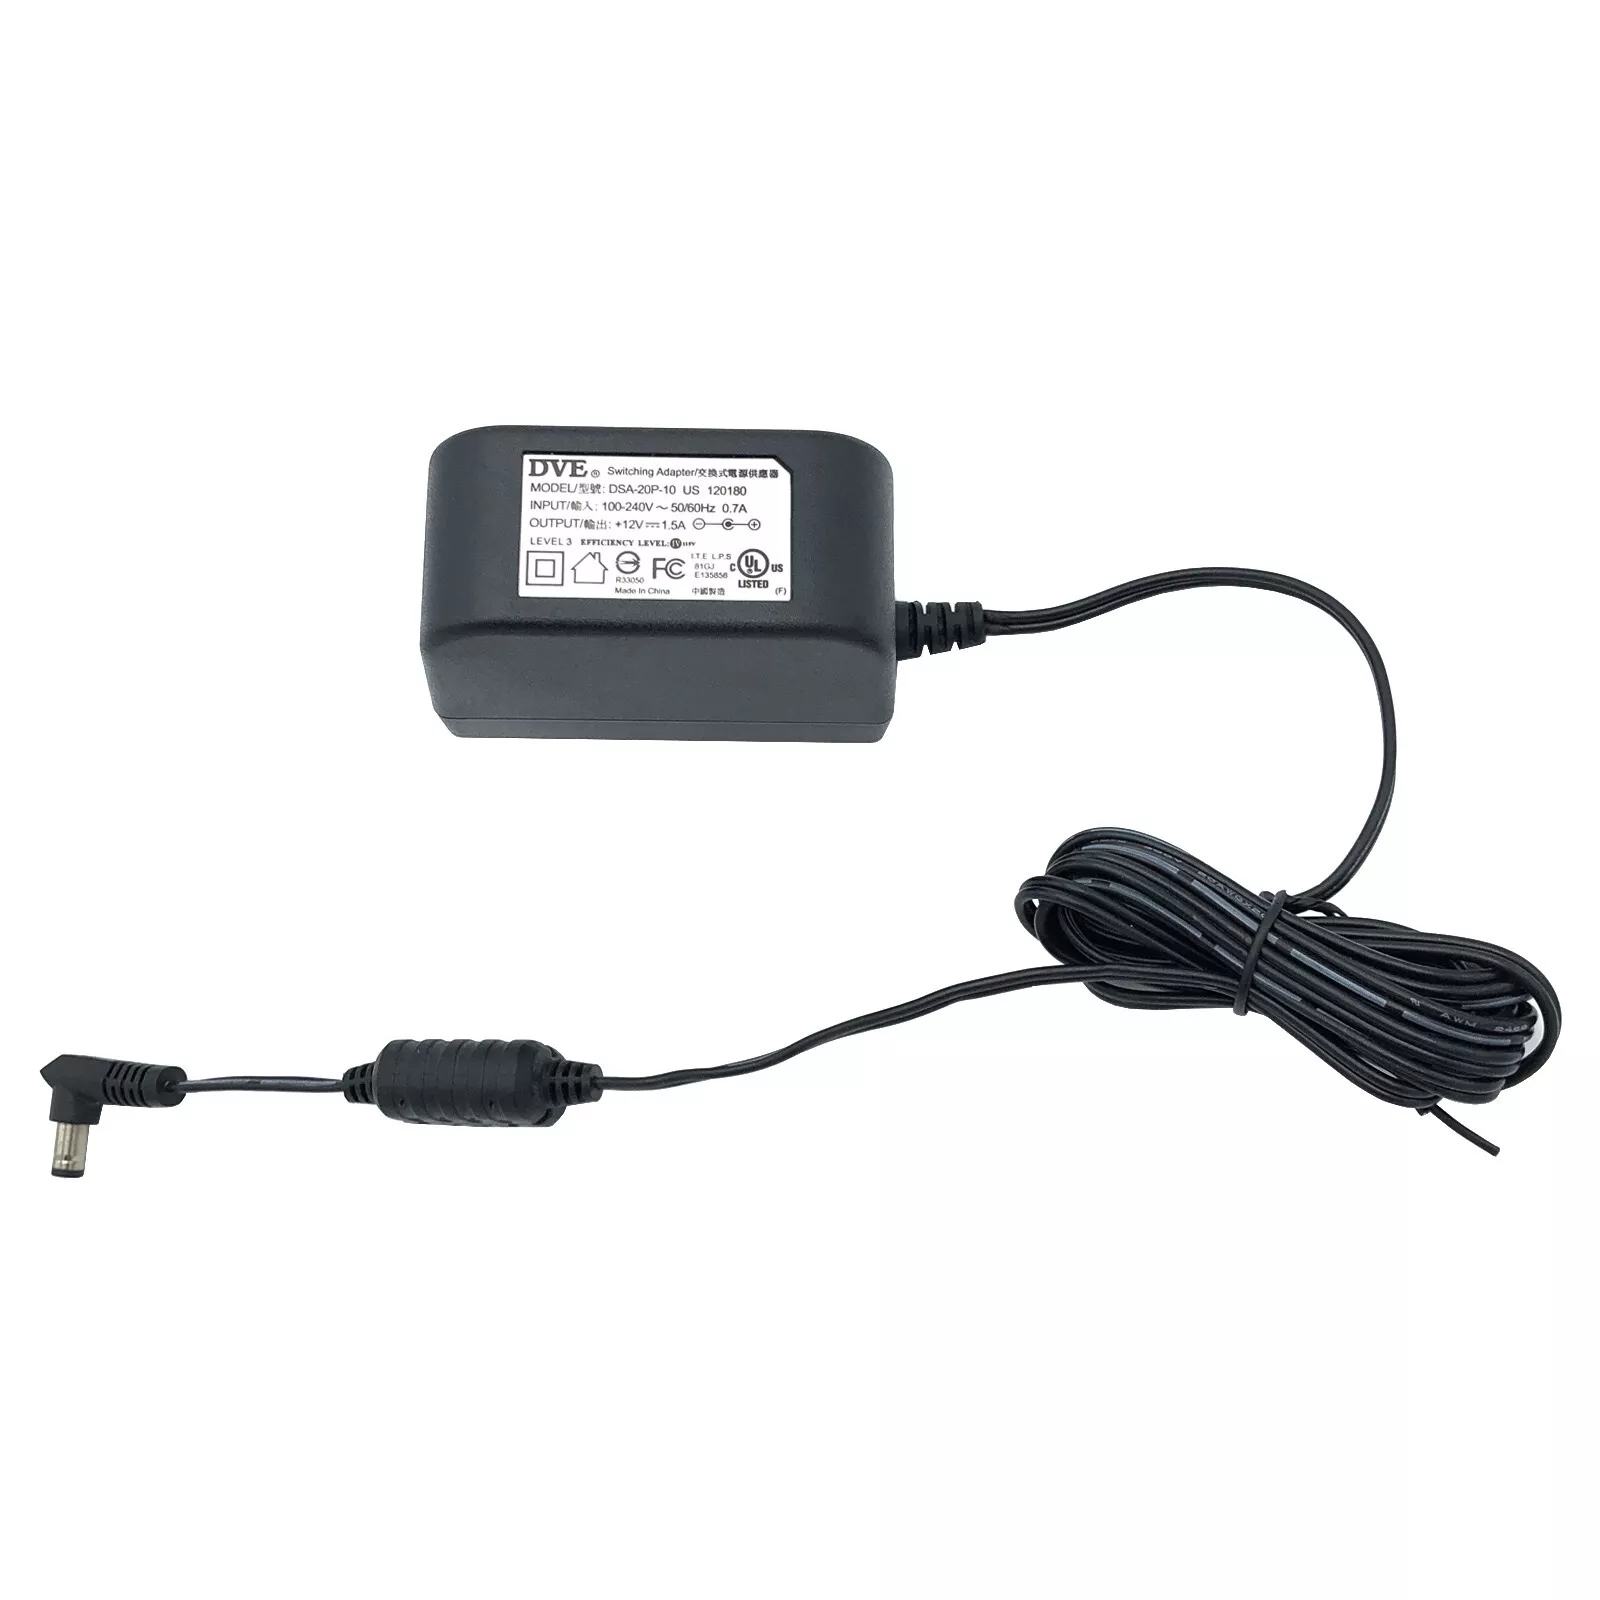 *Brand NEW*Genuine 12V 1.5A 18W DVE AC DC Wall Switching Adapter Model DSA-20P-10 Power Supply